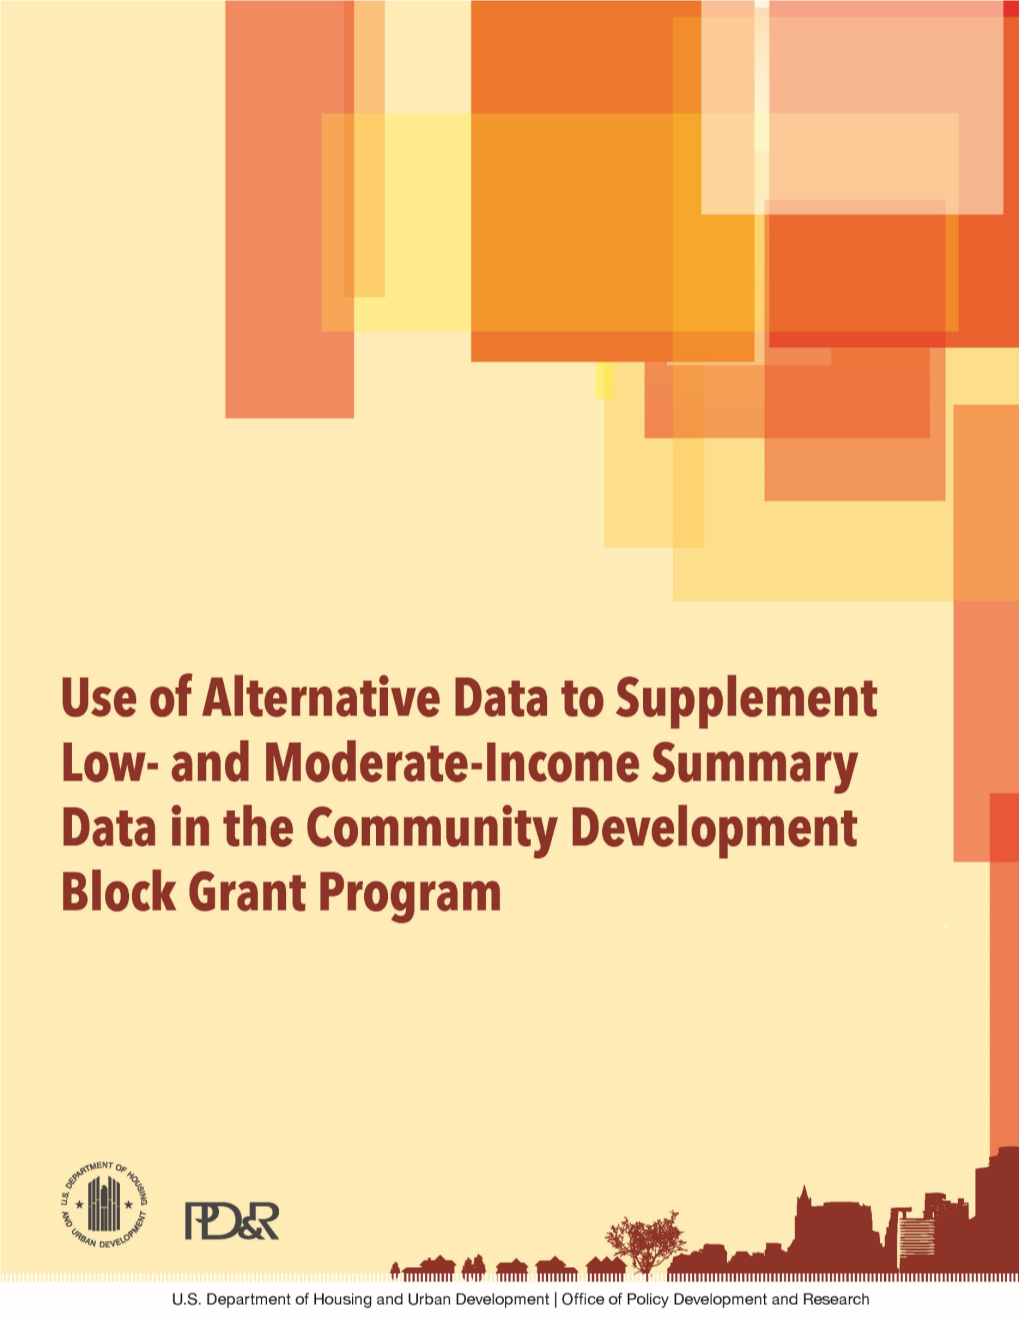 Use of Alternative Data to Supplement Low- and Moderate-Income Summary Data in the Community Development Block Grant Program